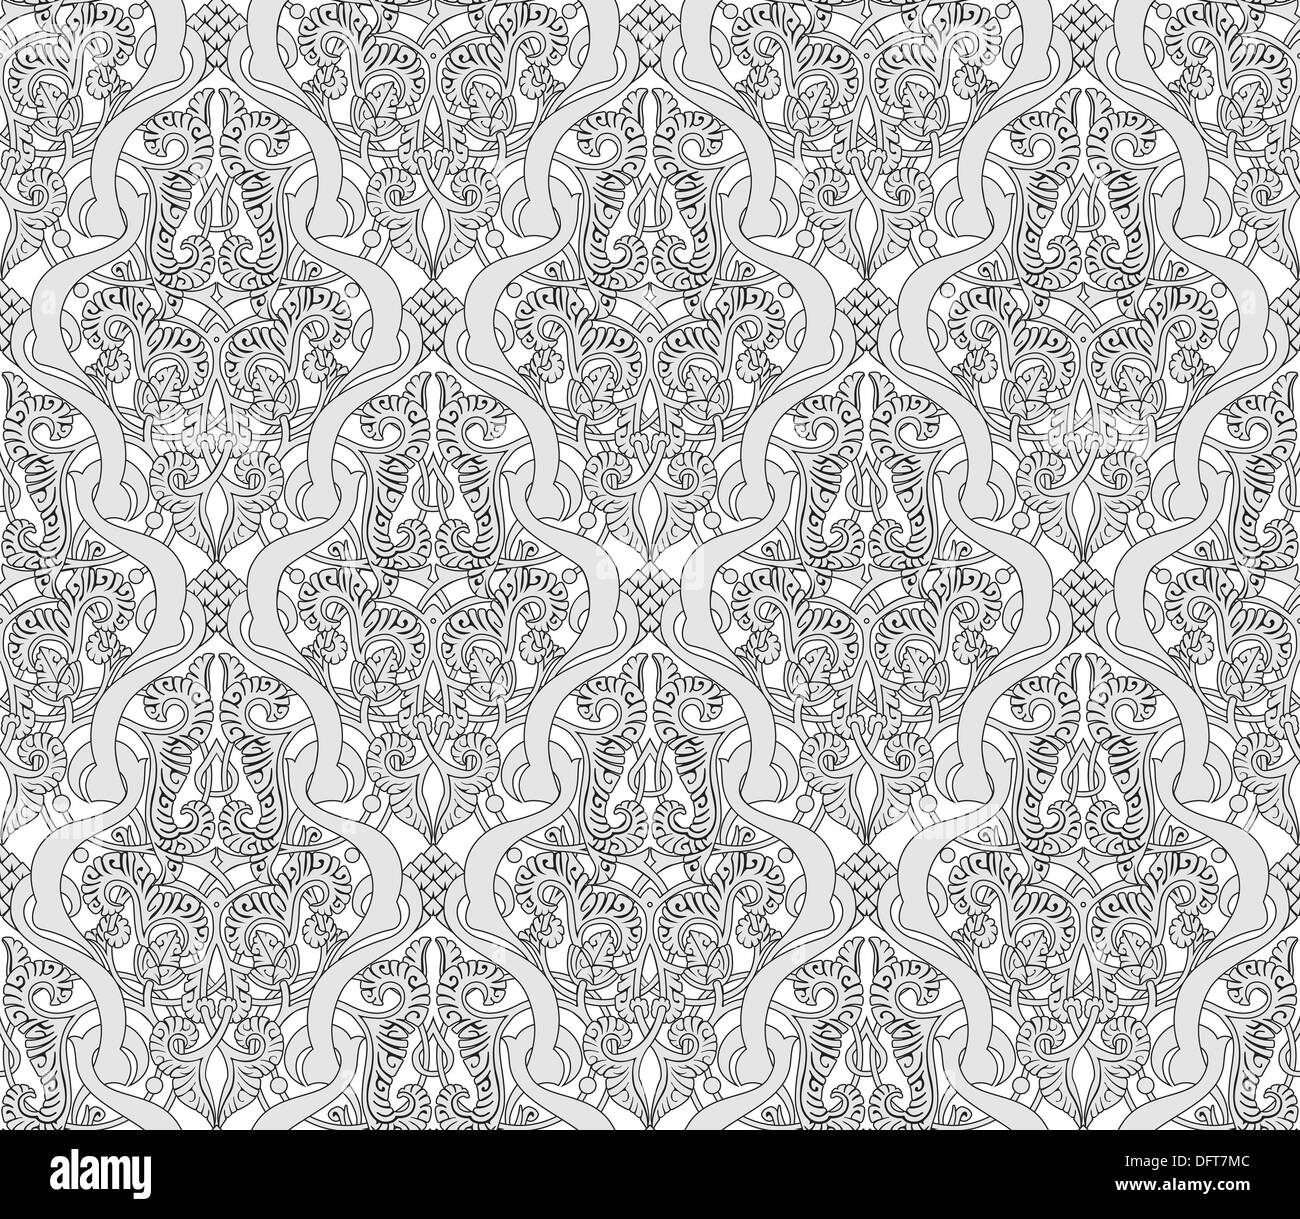 Illustration of an intricate seamlessly tilable repeating Art Nouveau motif vintage pattern Stock Photo